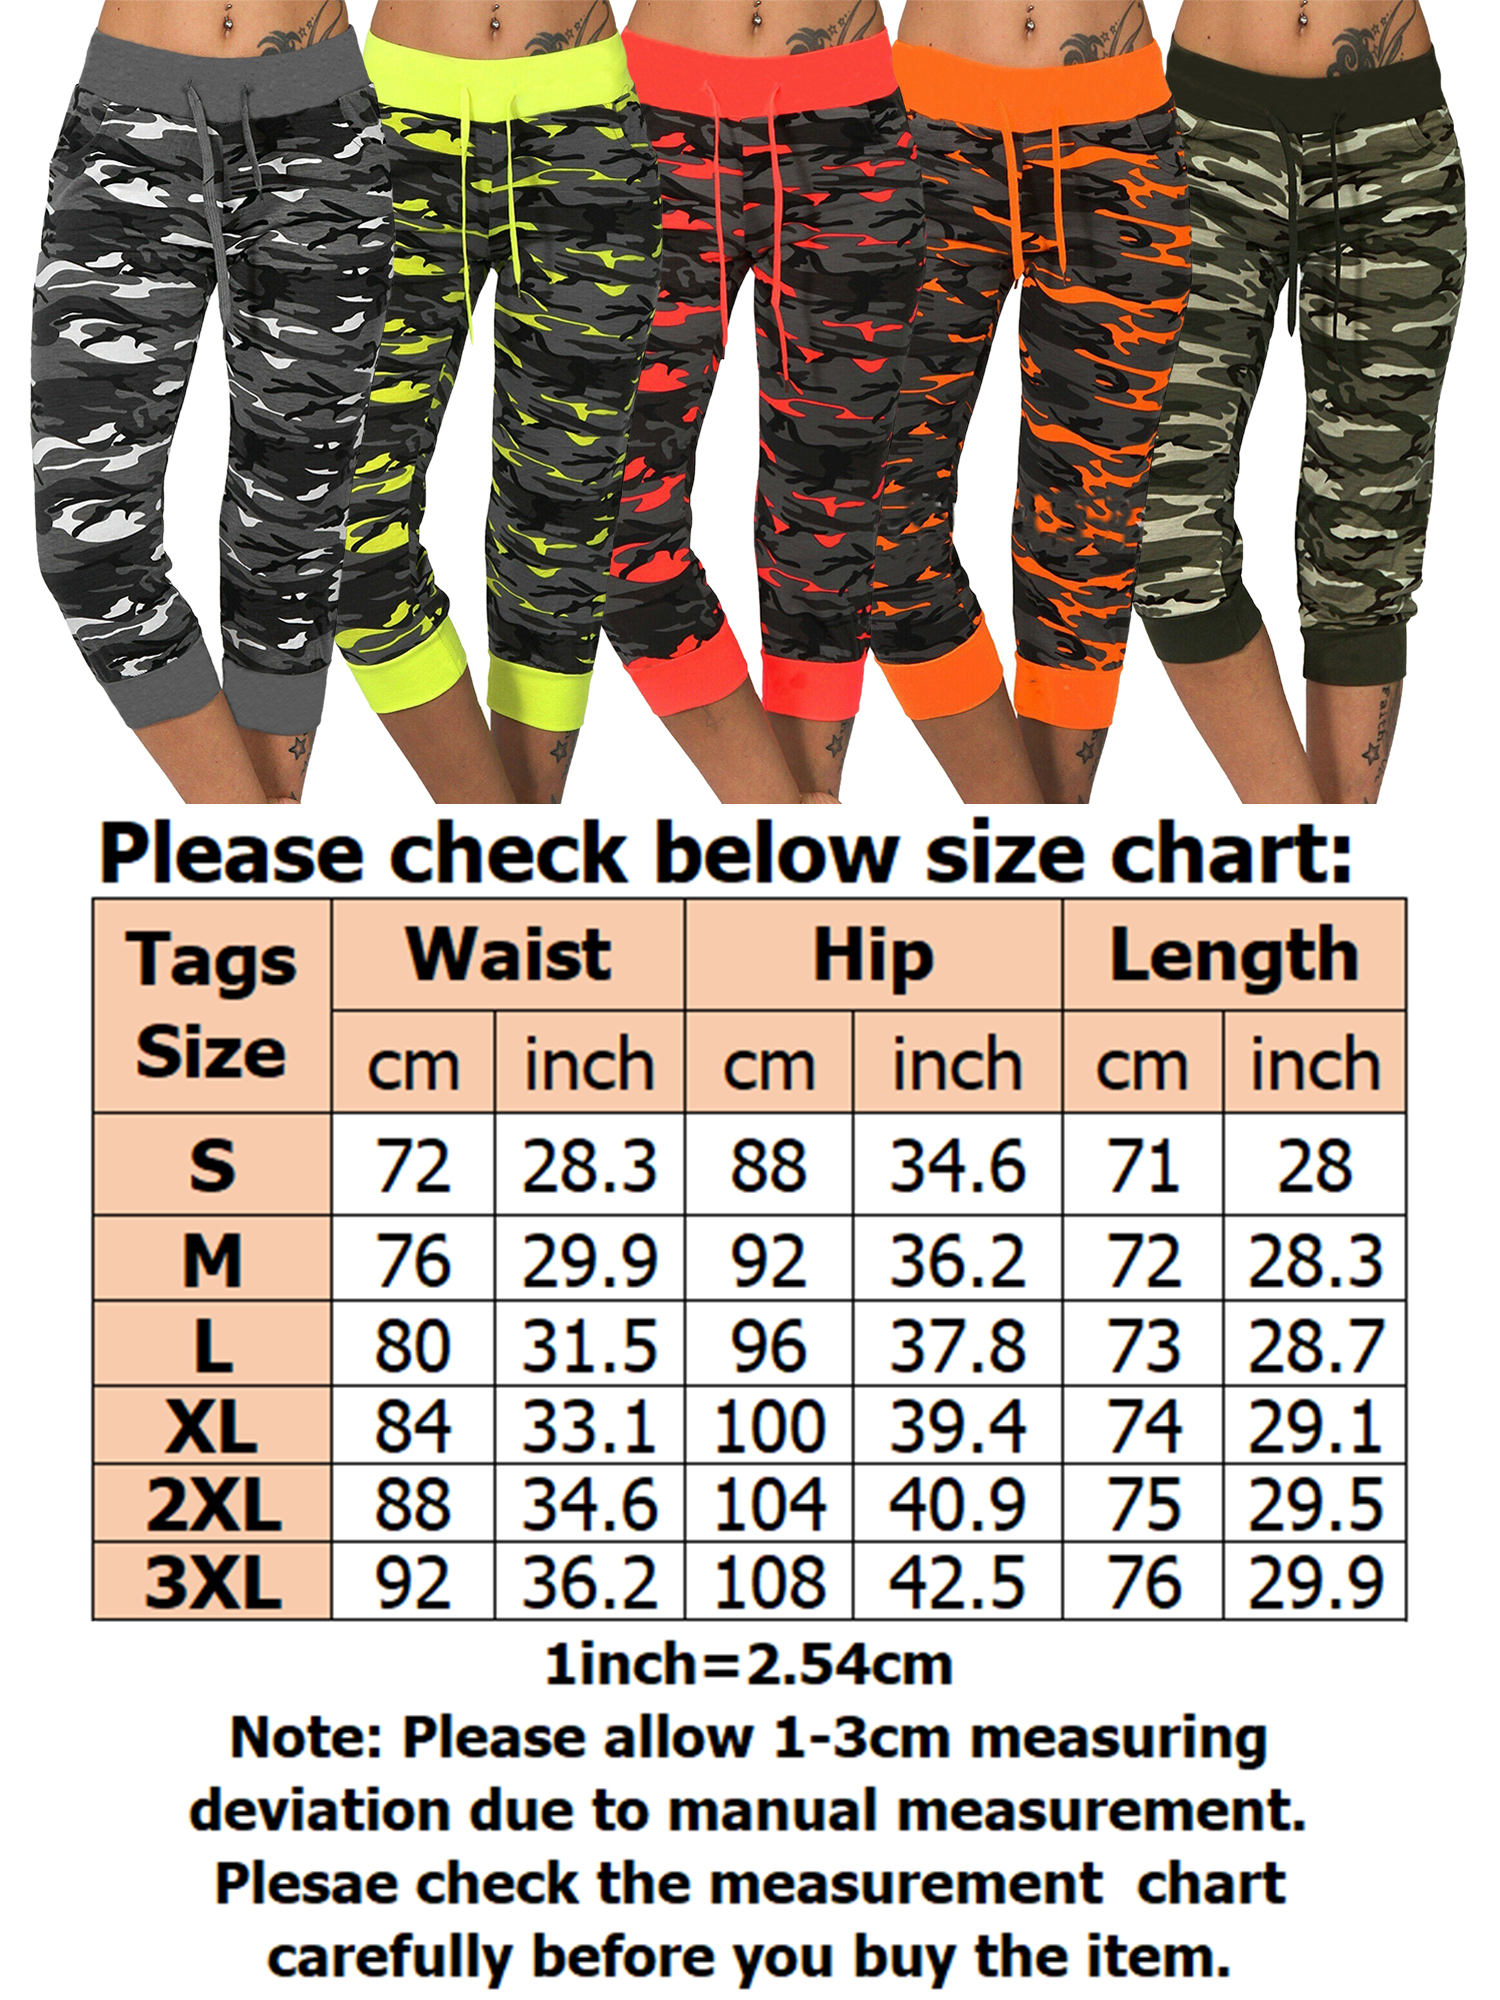 (2 Packs) Juniors' Plus Size Camo Sports Yoga Crop Jeggings High Waist Tummy Control Oversized Camouflage Pants - image 2 of 3